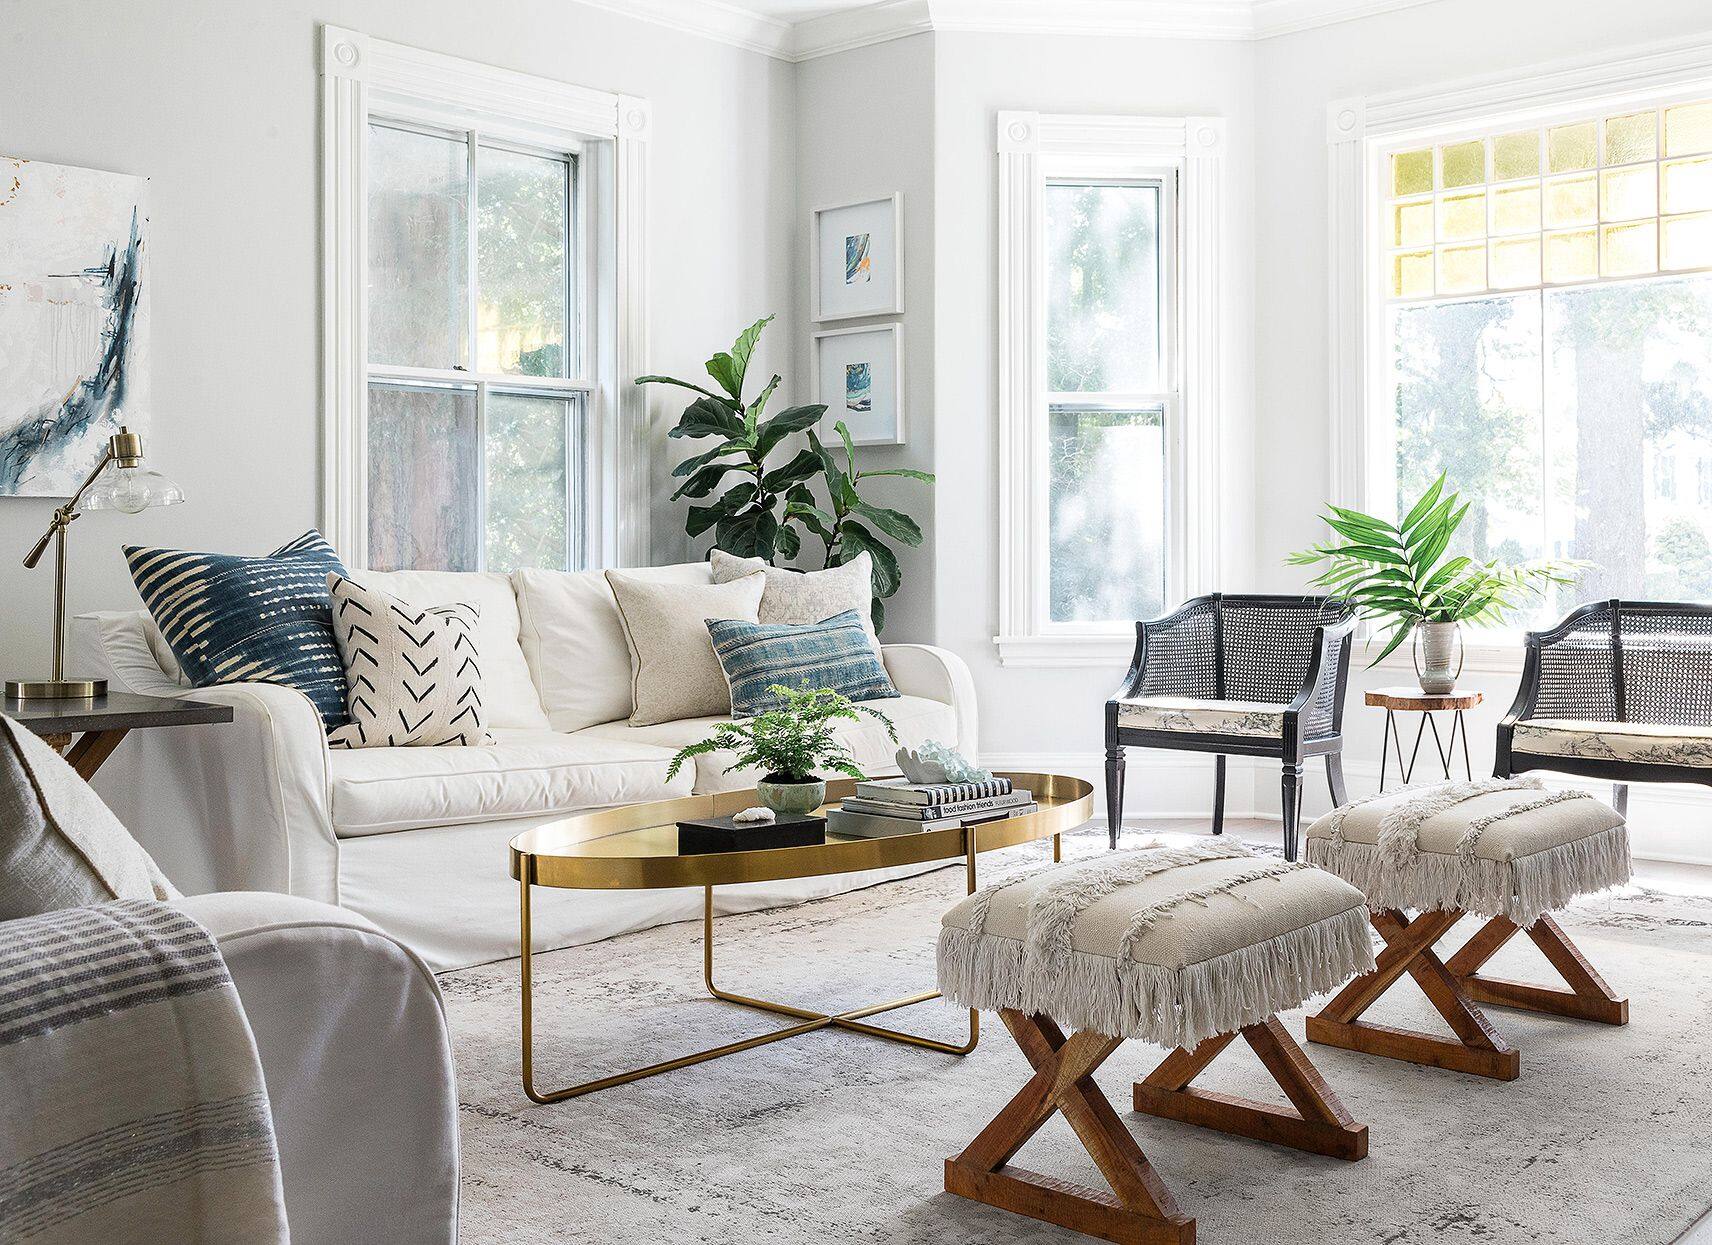 Decorating on a Dime: Affordable Ideas for Stylish Home Interiors